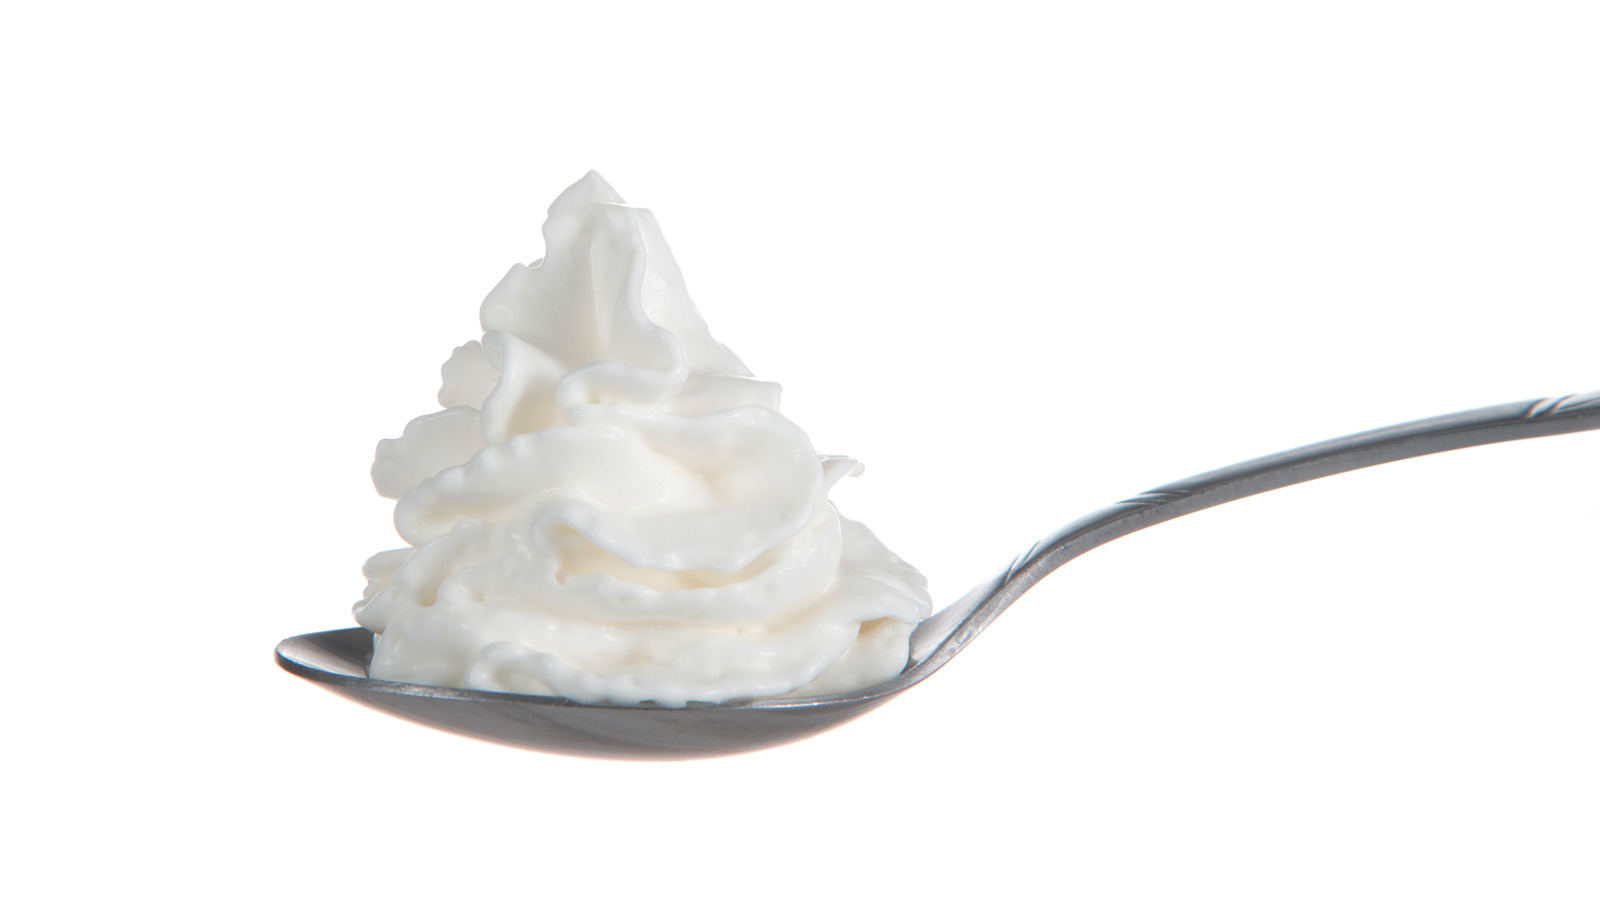 https://www.mashed.com/img/gallery/whipped-cream-brands-ranked-from-worst-to-best/l-intro-1639250748.jpg